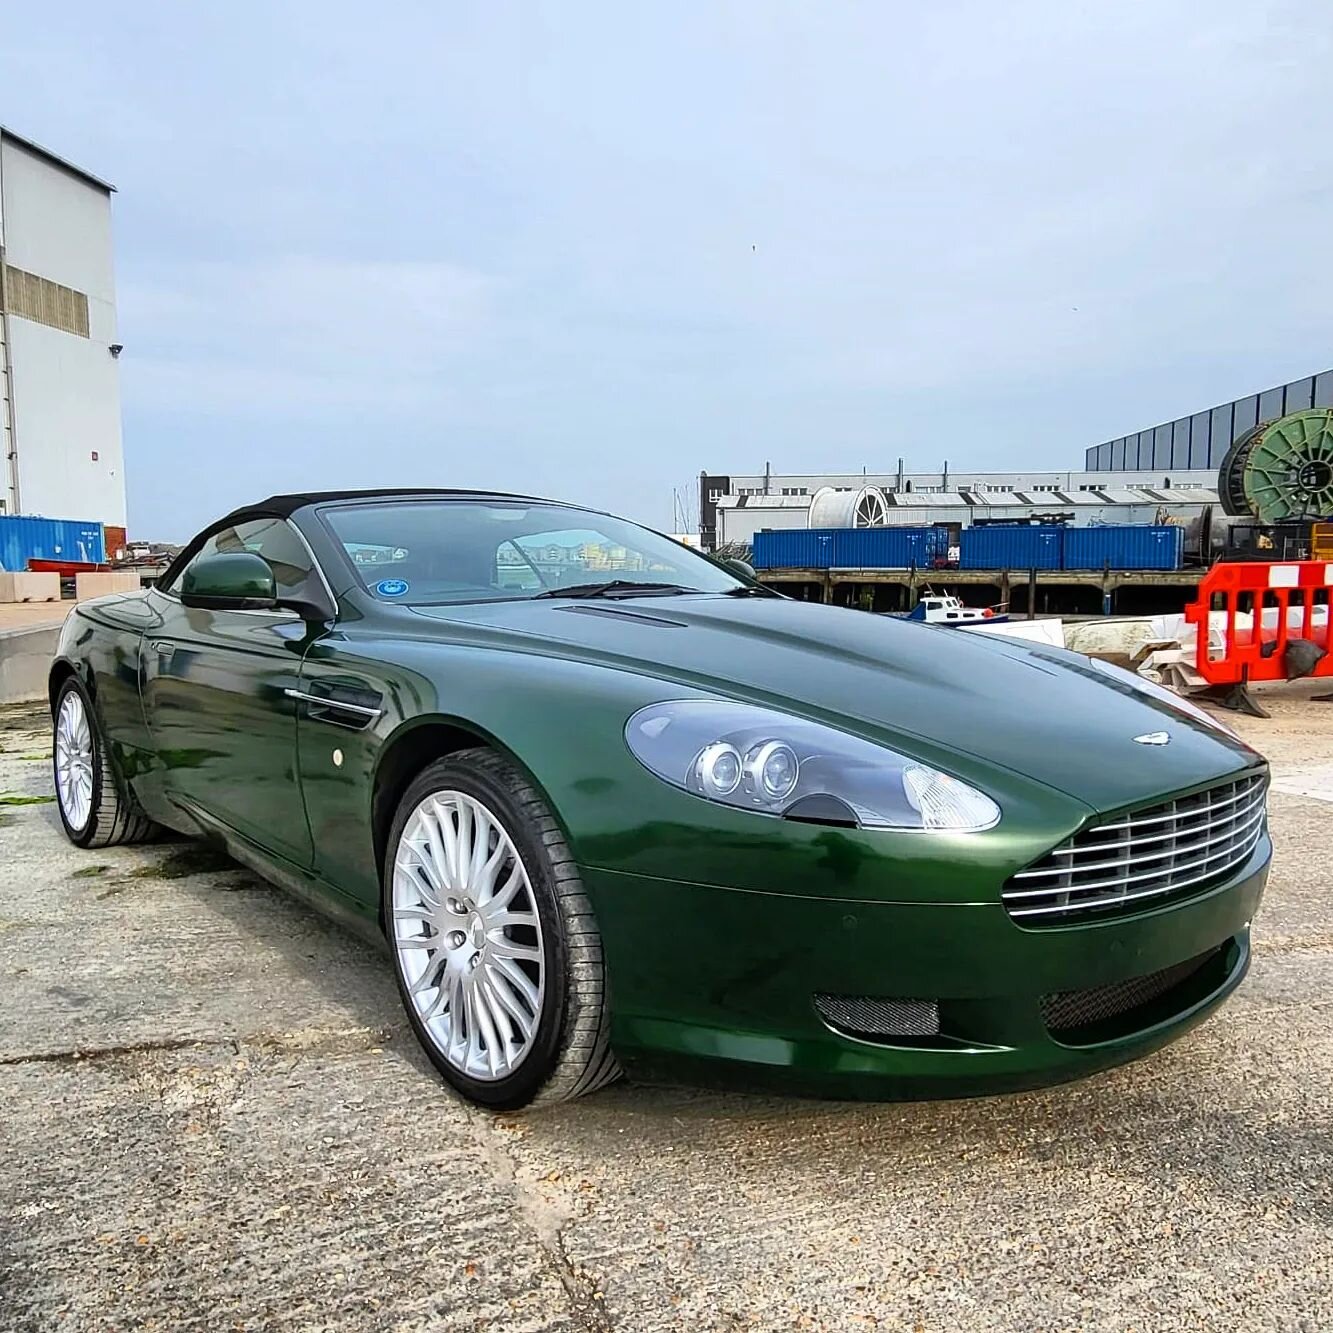 Really enjoyed this one.  Can't thank @lived9liveskustoms for their excellent bodywork they did and @cjpremiumvaleting for Al the finishing touches to make it really pop 

#wrap #db9 #v12 #astonmartin #hexis #sherwoodgreen #bginstall #lived9liveskust